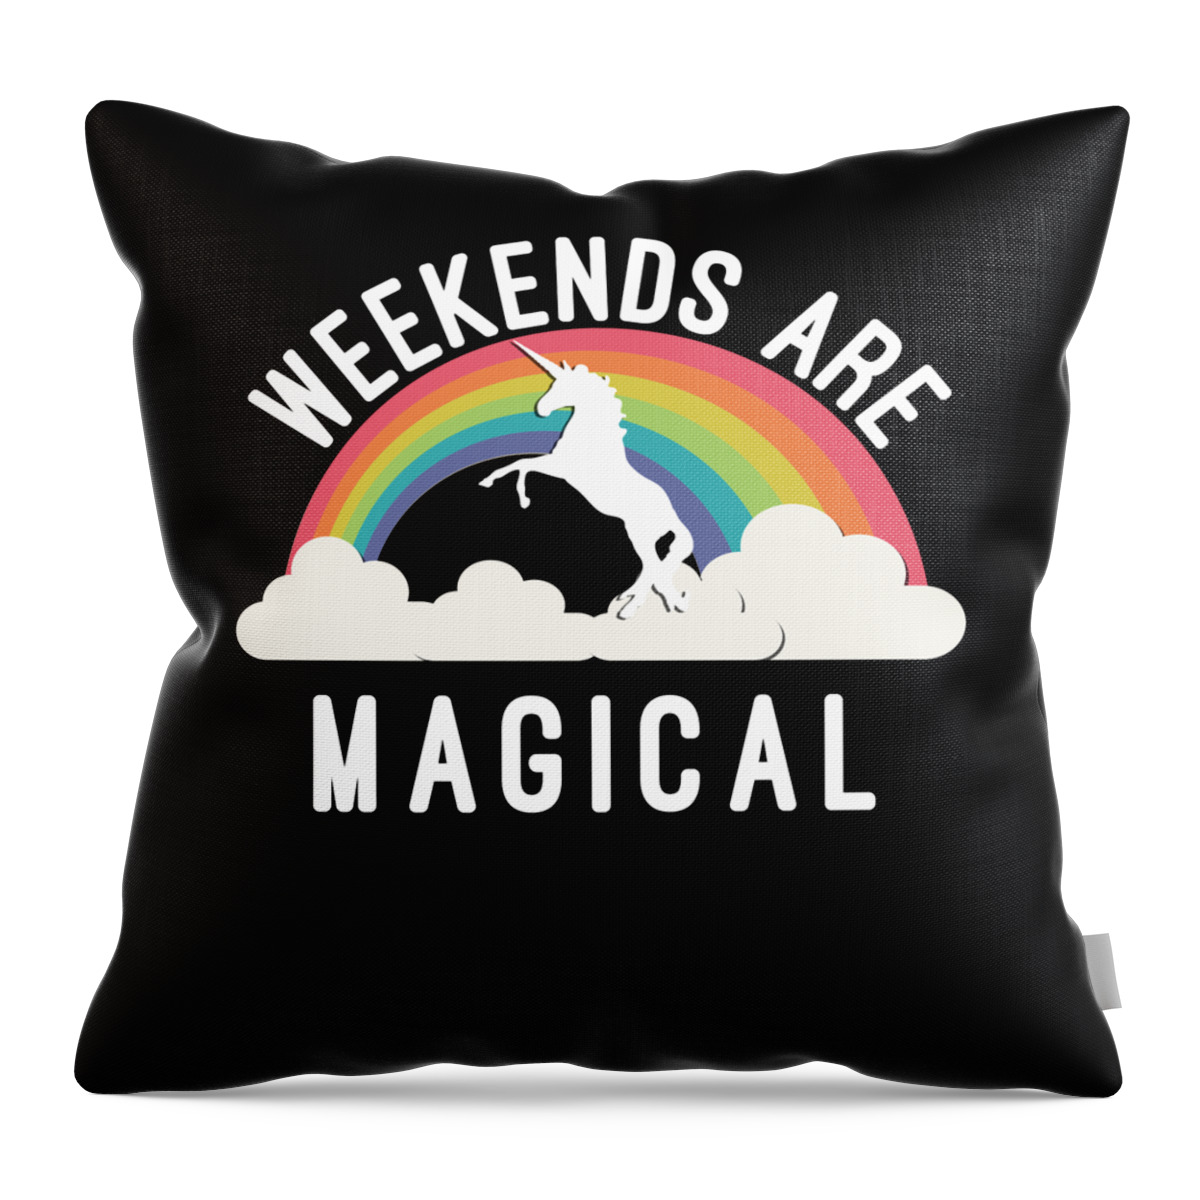 Funny Throw Pillow featuring the digital art Weekends Are Magical by Flippin Sweet Gear